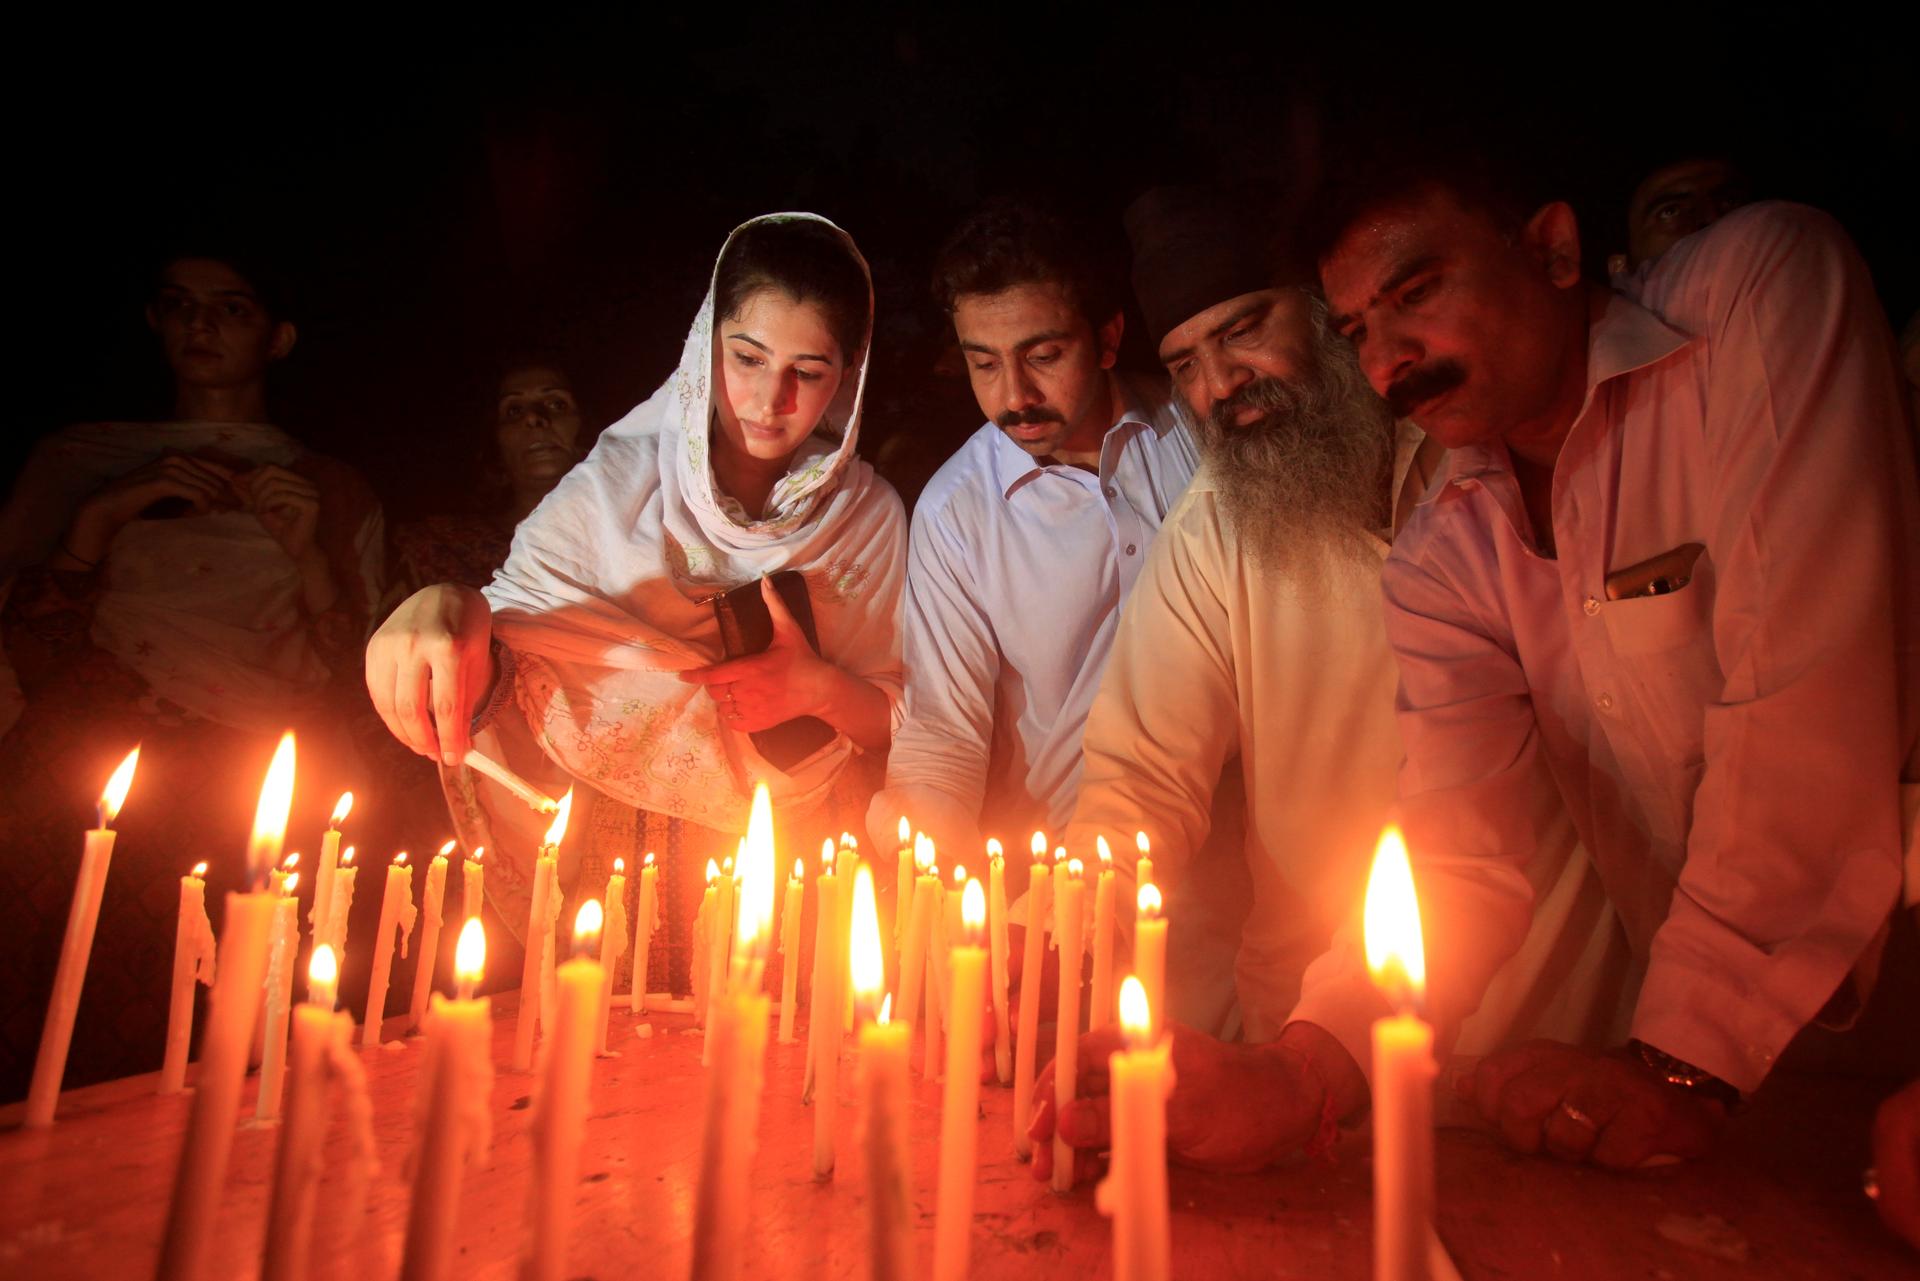 Residents light candles to honour victims of the blast in Quetta during a candellight vigil in Peshawar, Pakistan.